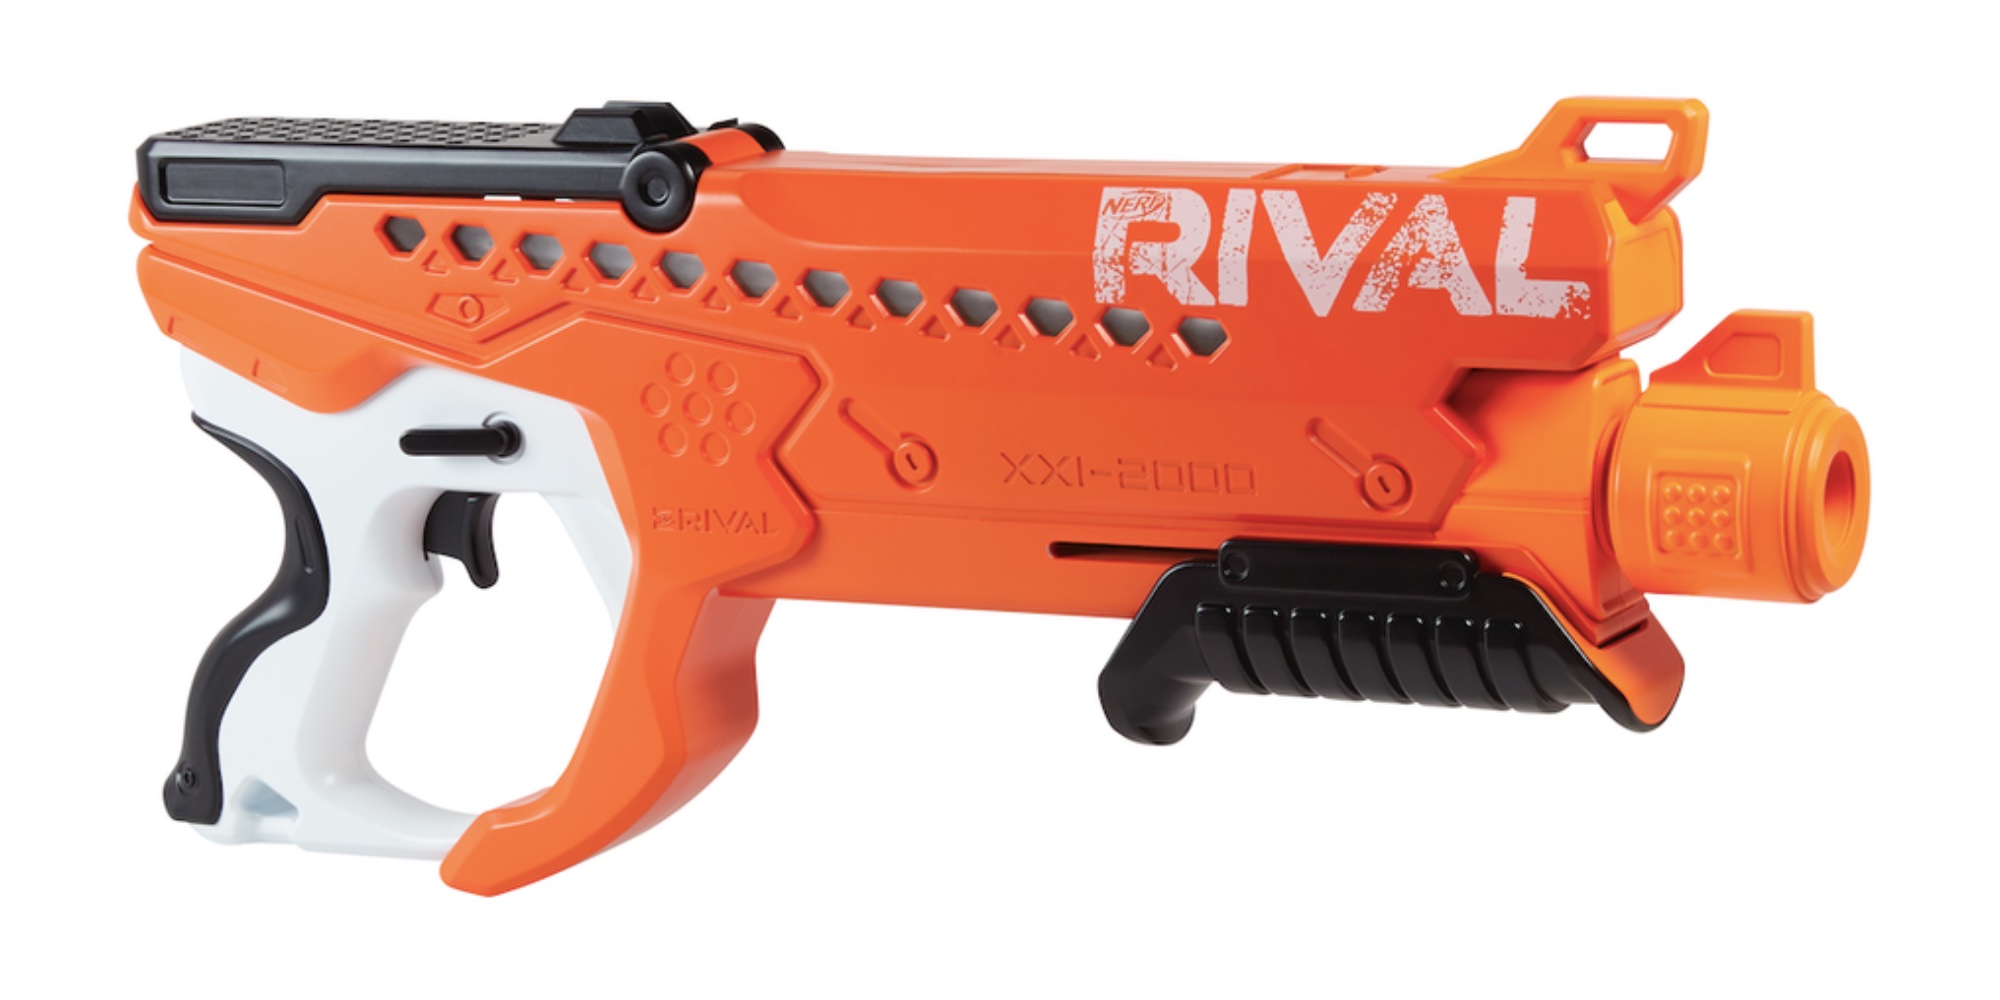 NERF Rival Shot collection you shoot around corners 9to5Toys